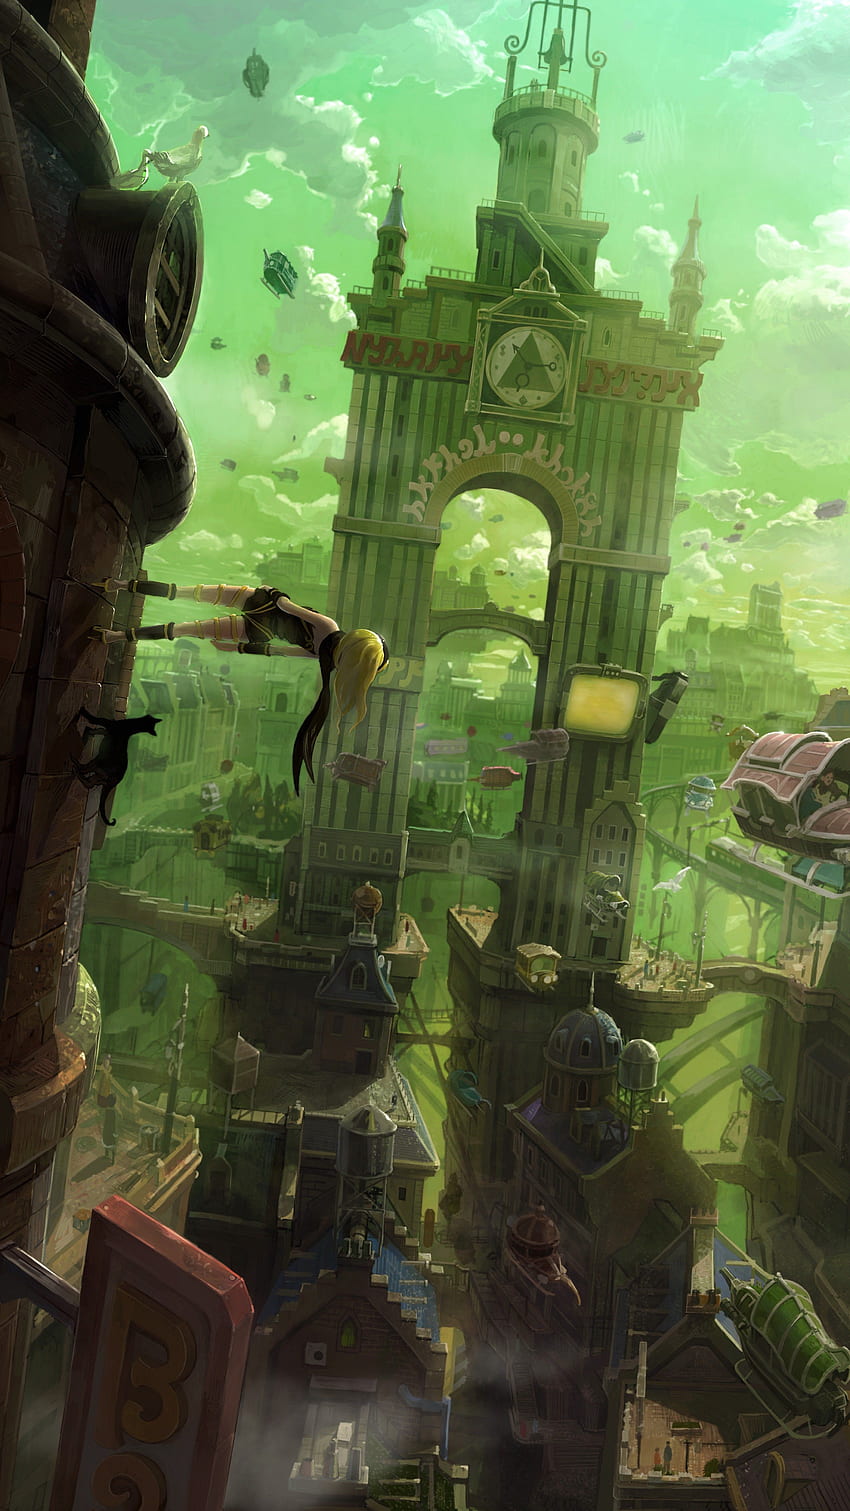 Did some compiling from the Gravity Rush illustration gallery, Rush iPhone HD phone wallpaper